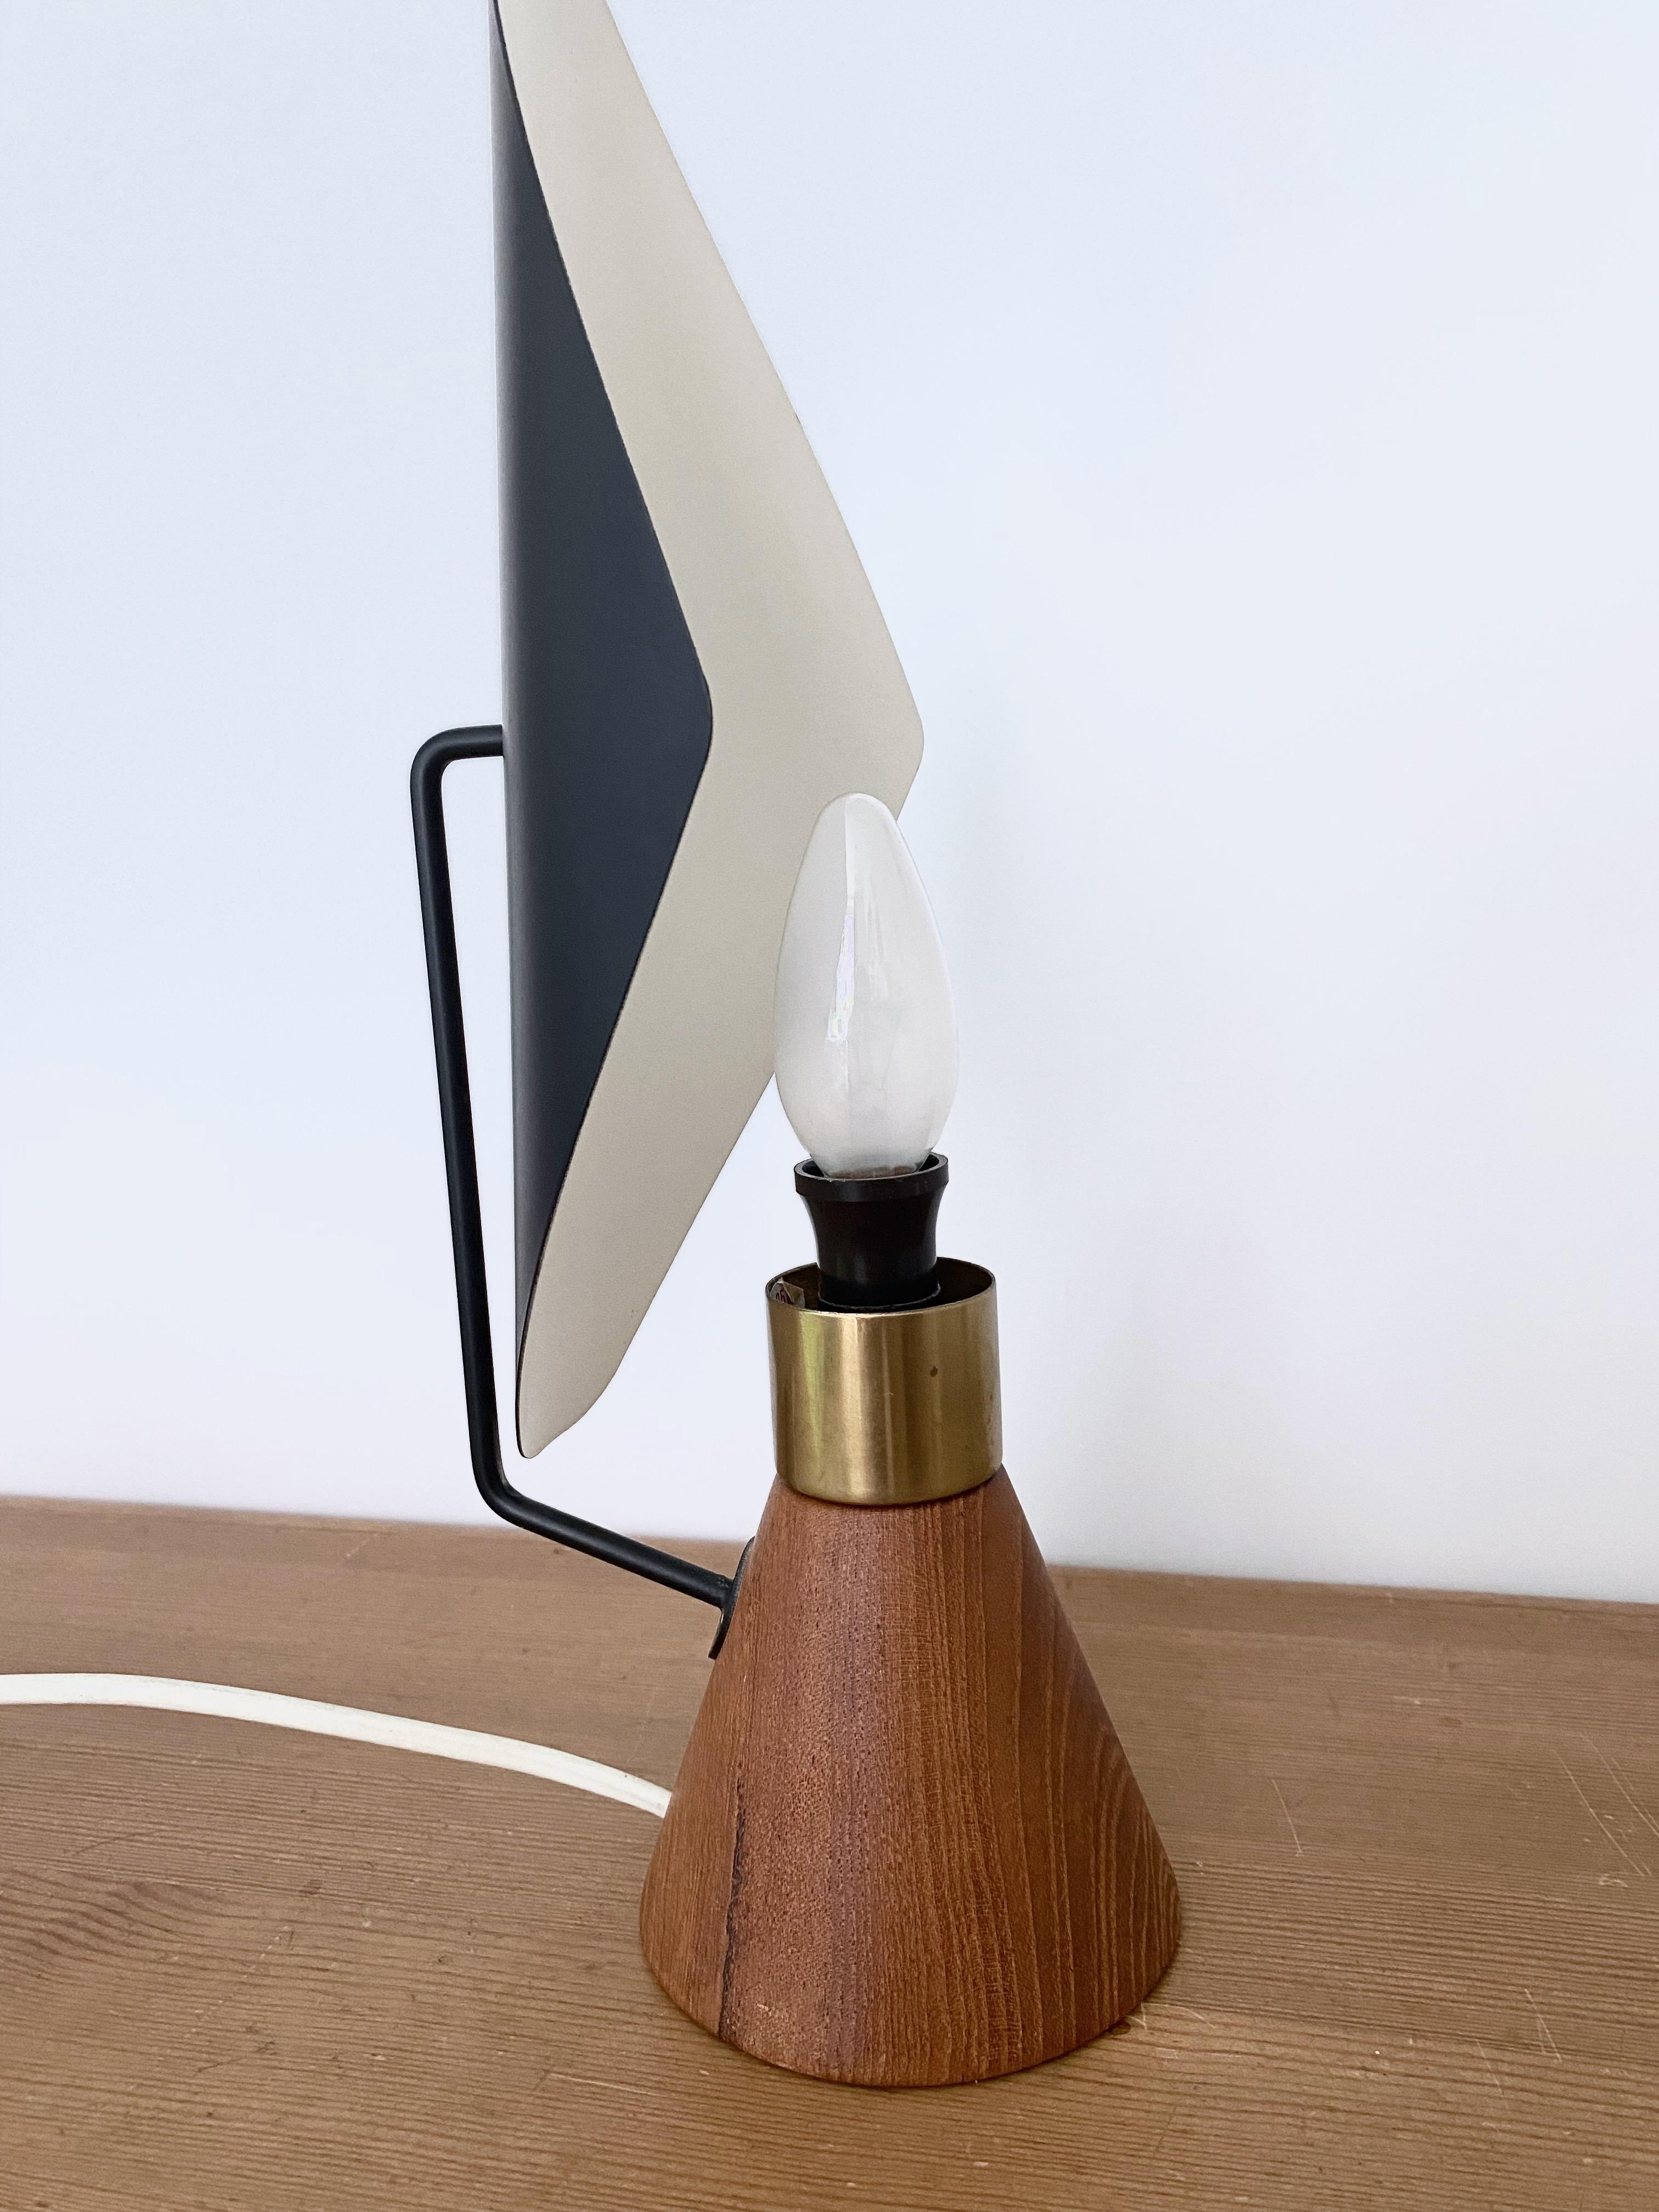 Rare table lamp by Svend Aage Holm-Sørensen for ASEA, Sweden. Designed in the 1950s with a teak base and metal shade it has a very dramatic and striking look. Missing original lamp bulb but otherwise in a very good condition with small marks to the